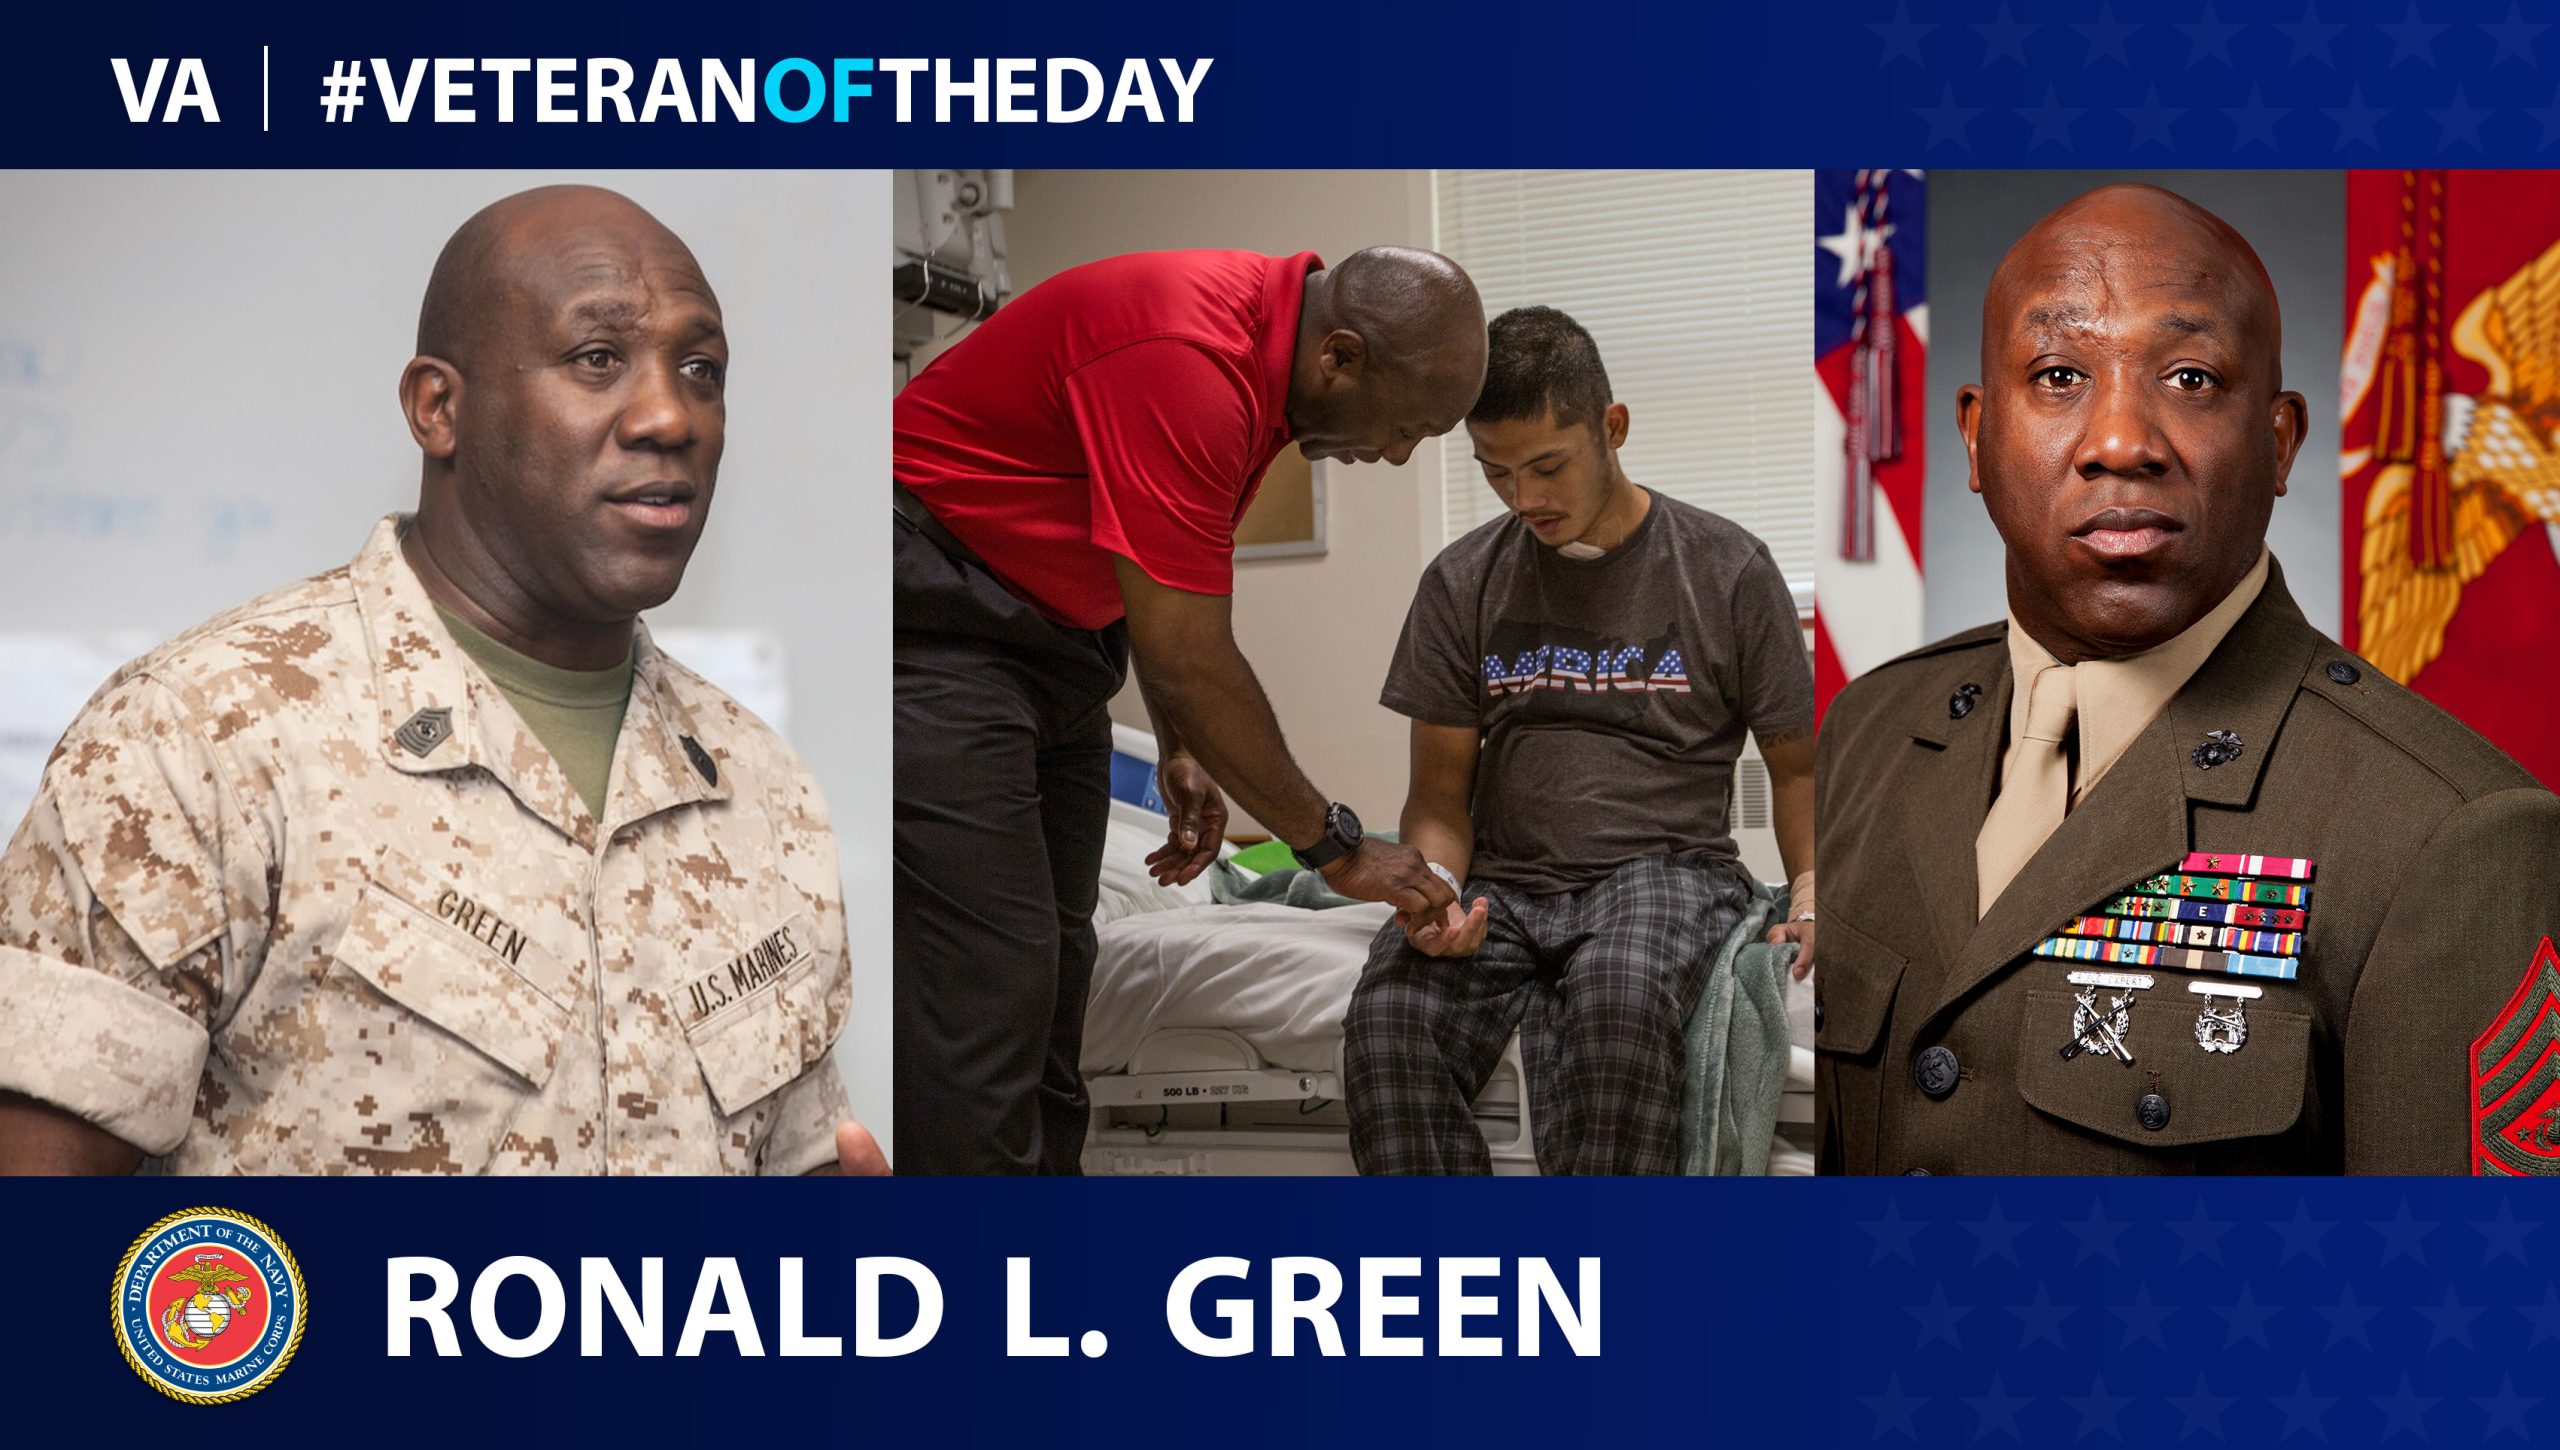 Marine Corps Veteran Ronald L. Green is today’s Veteran of the Day.